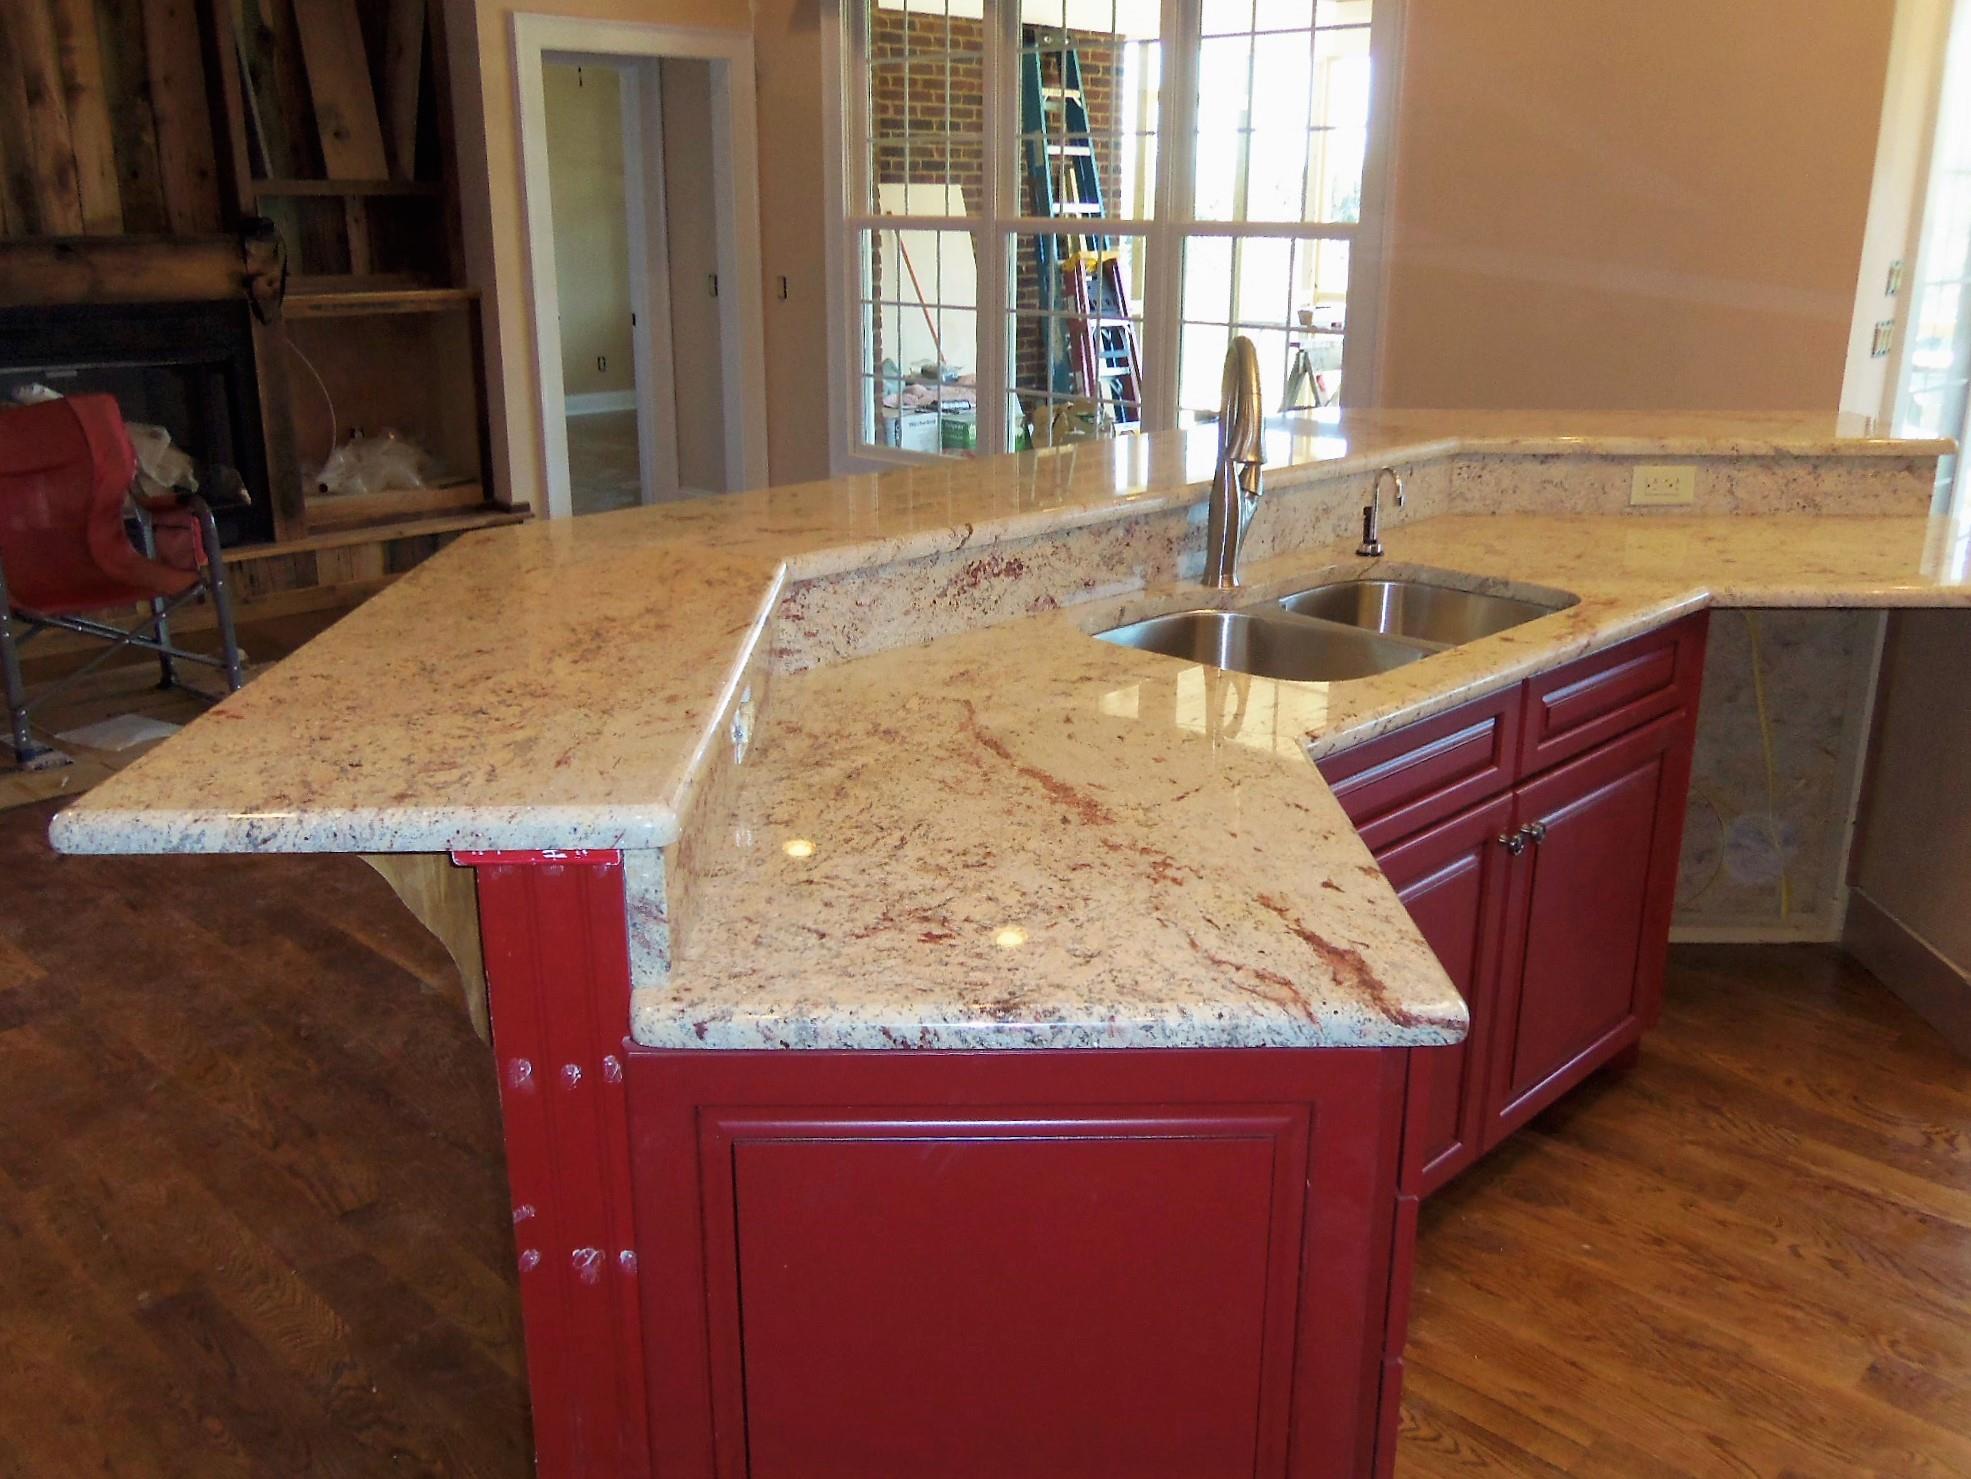 Cameo Marble & Granite 3697 TN-81, Fall Branch Tennessee 37656